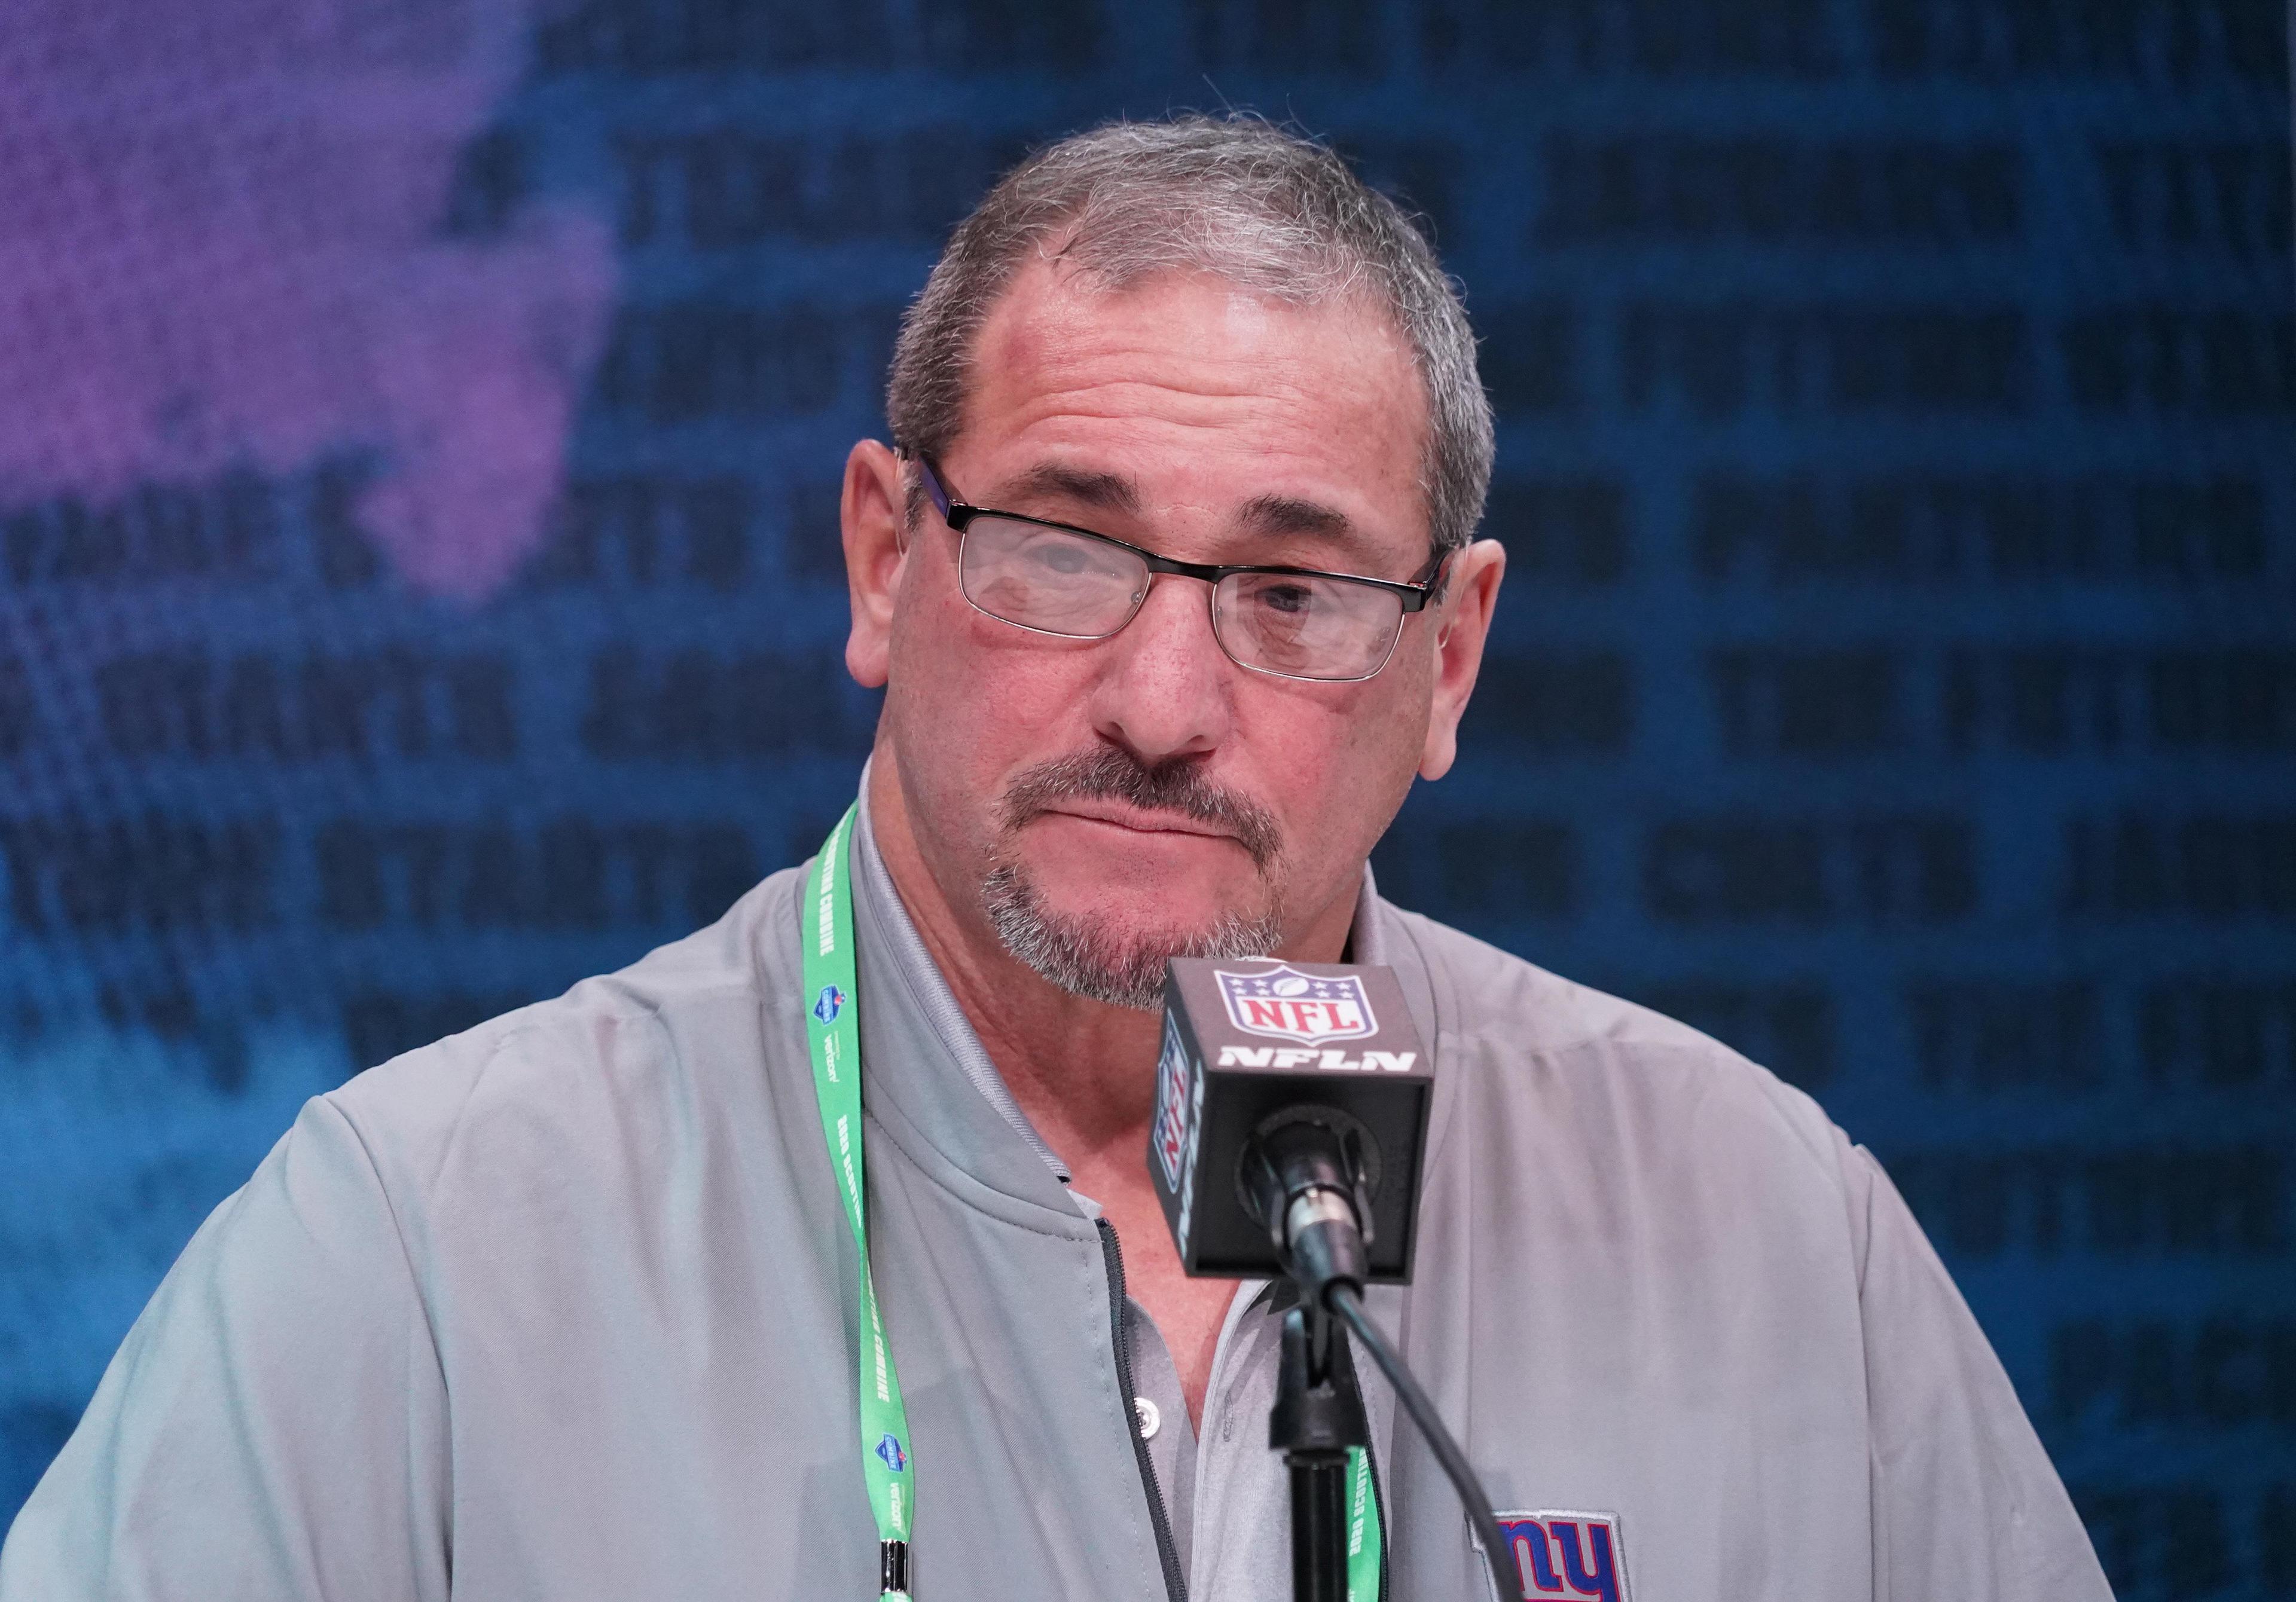 Feb 25, 2020; Indianapolis, Indiana, USA; New York Giants general manager Dave Gettleman during the NFL Scouting Combine at the Indiana Convention Center. Mandatory Credit: Kirby Lee-USA TODAY Sports / © Kirby Lee-USA TODAY Sports